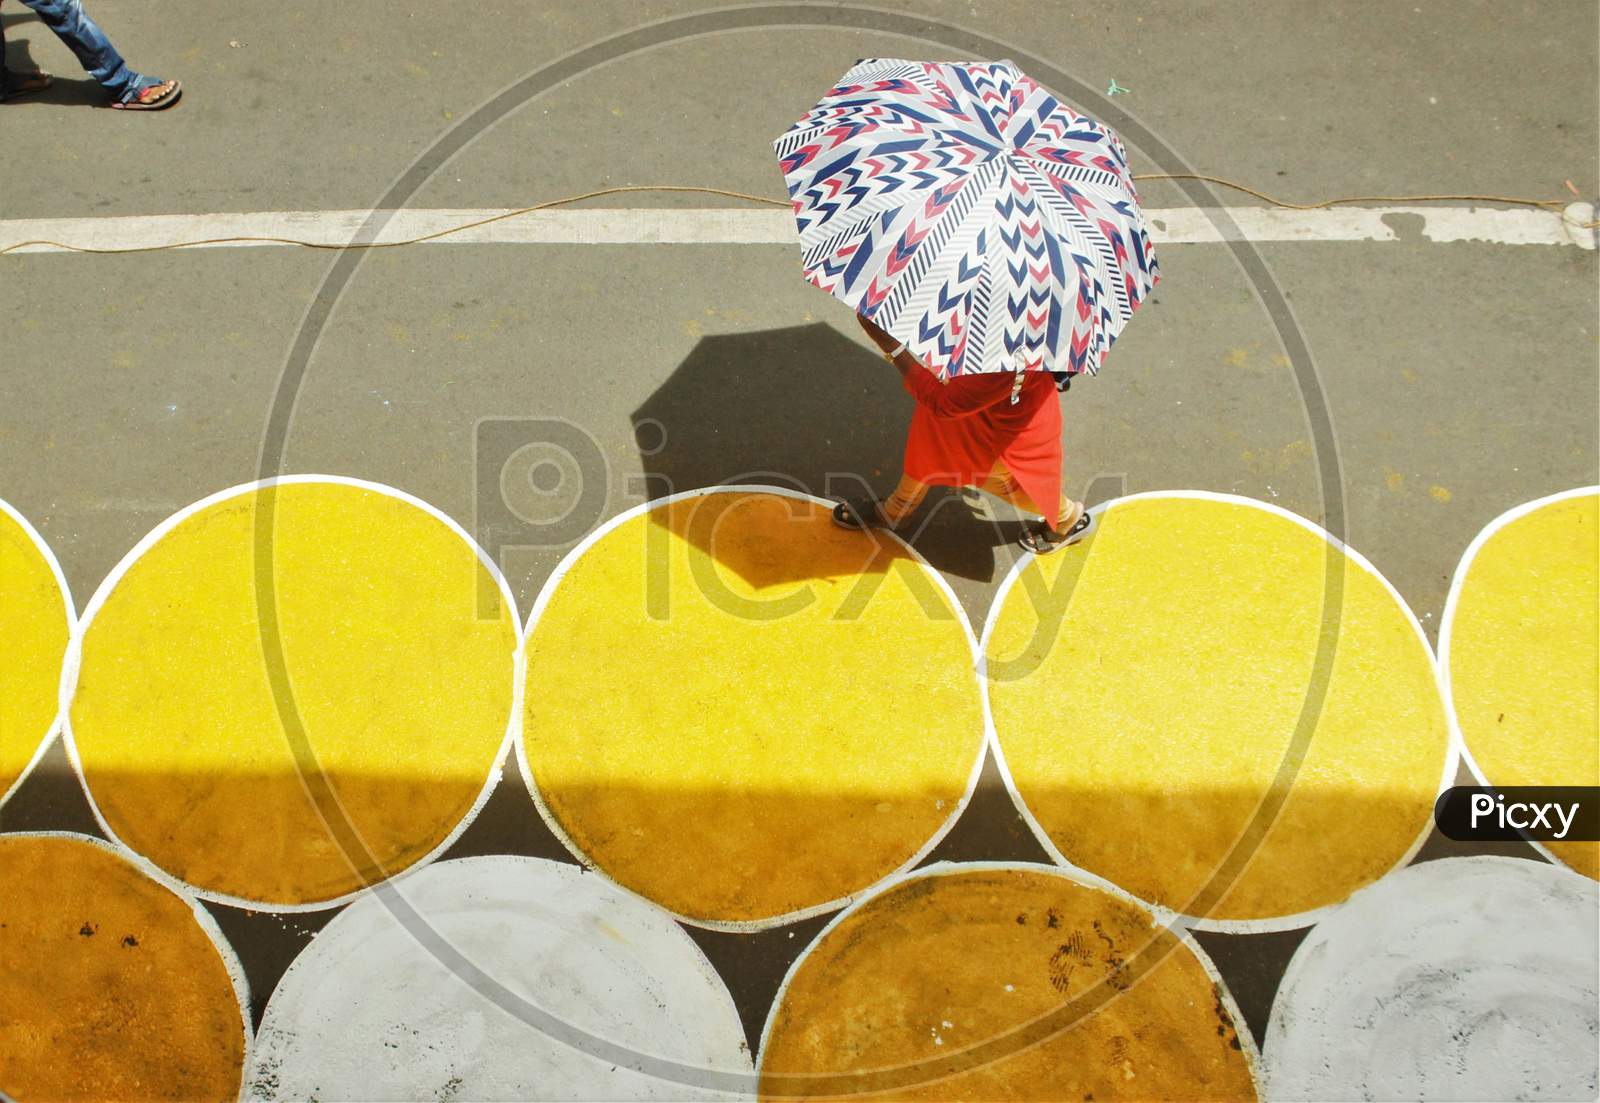 A woman with an umbrella walks past yellow circles painted for physical distancing at a residential-cum-market area, in Mumbai, India on June 29, 2020.